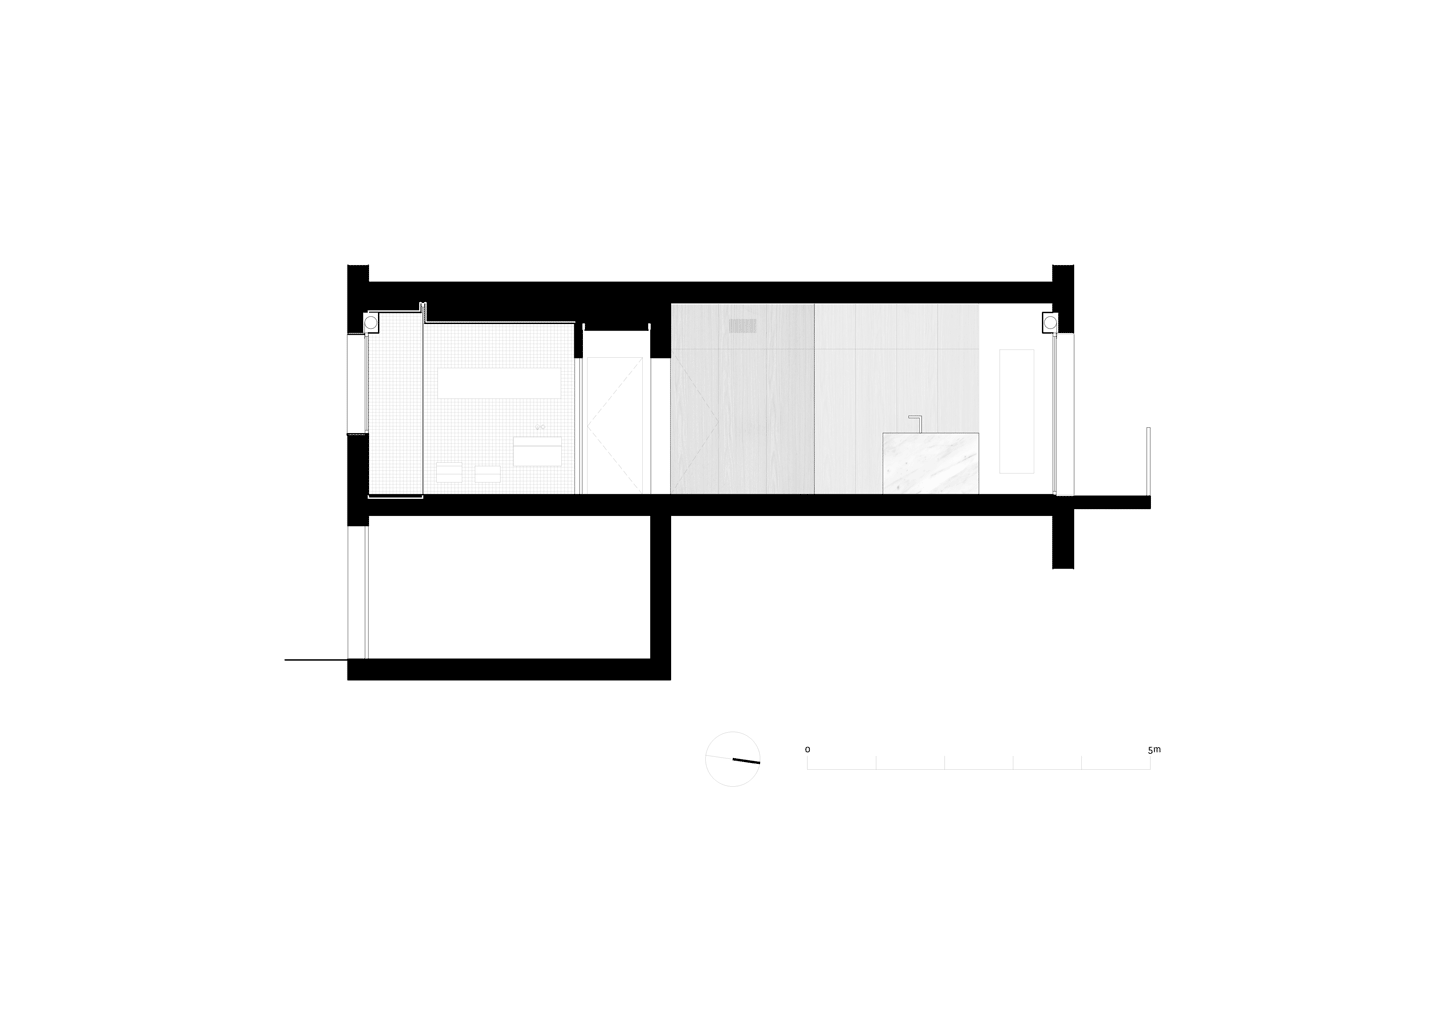 Apartment in Pisa - Section